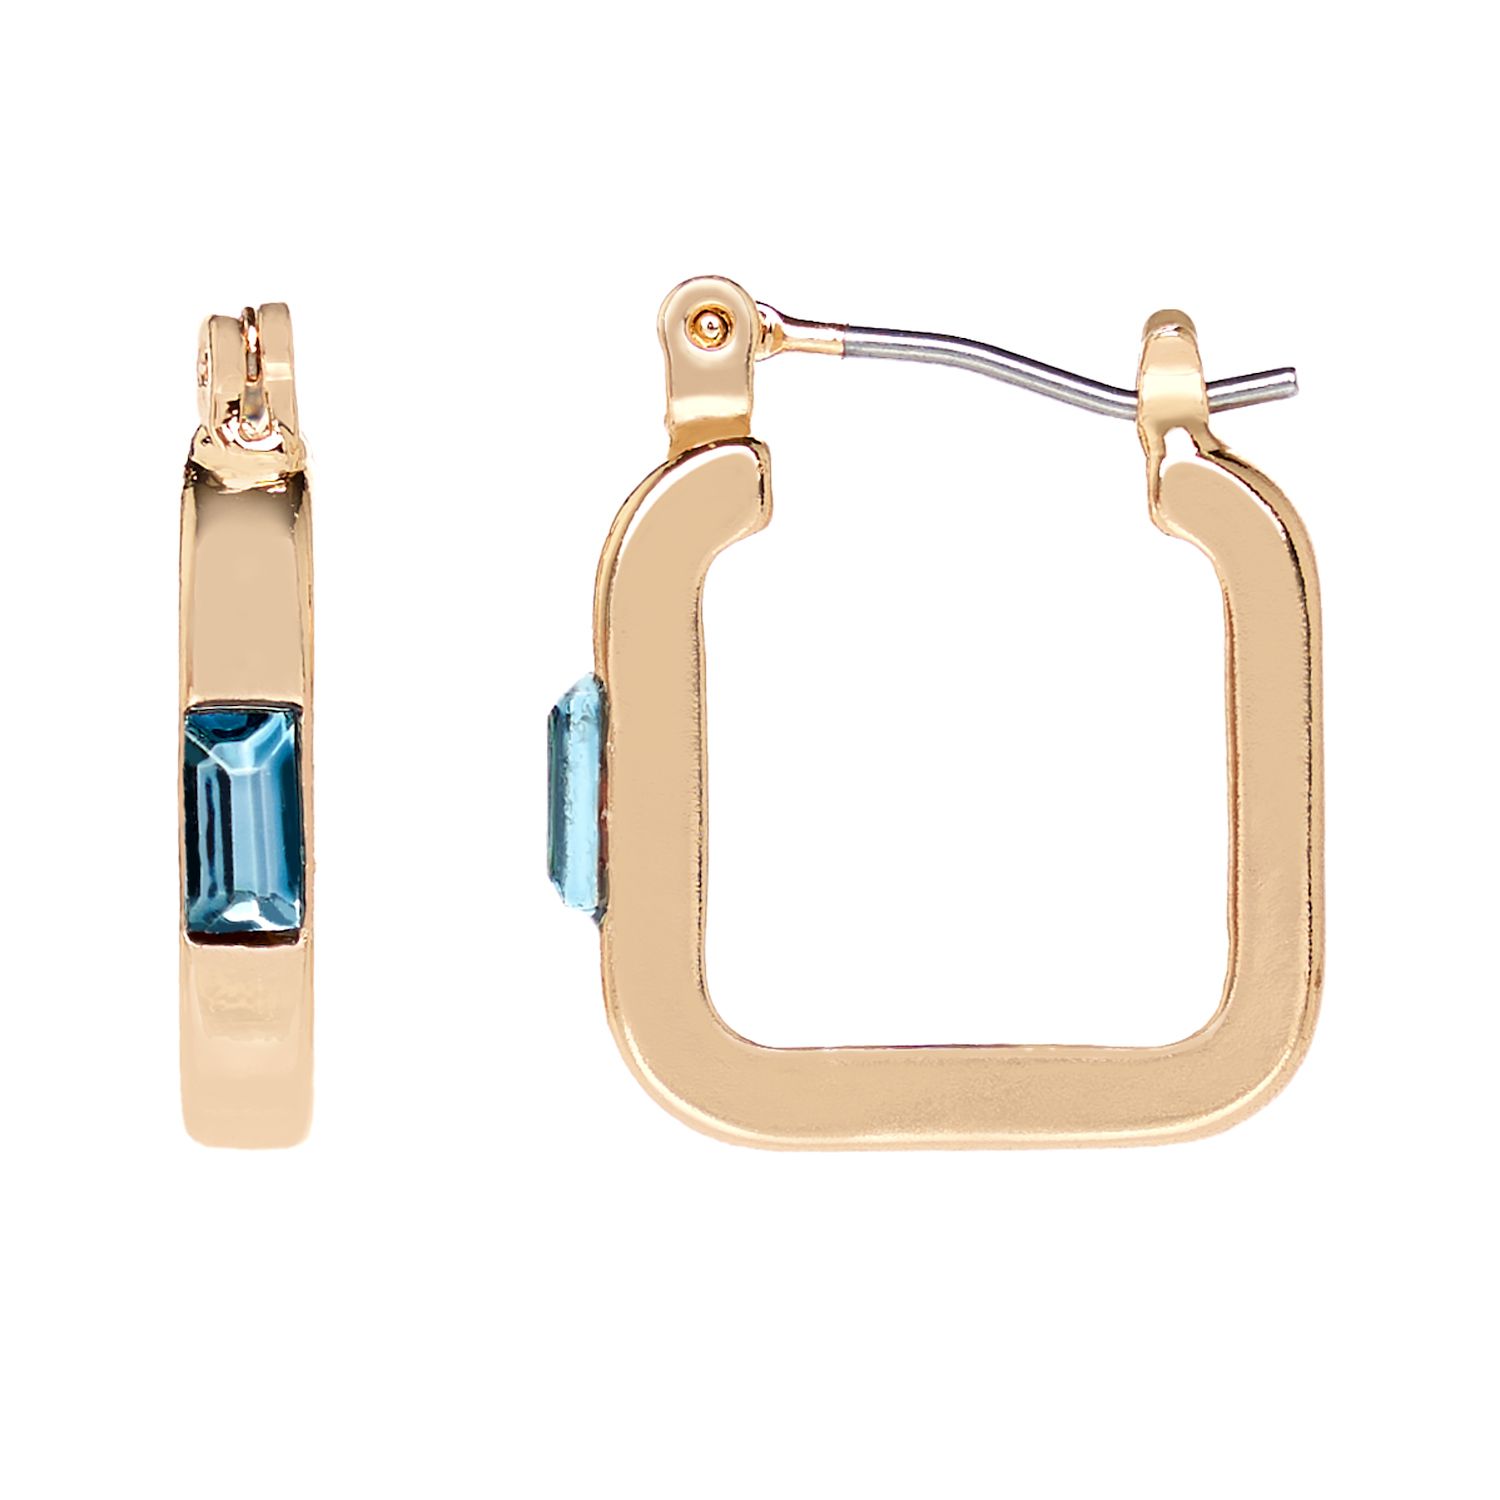 Image for LC Lauren Conrad Blue Simulated Crystal Square Mini Hoop Earrings at Kohl's.